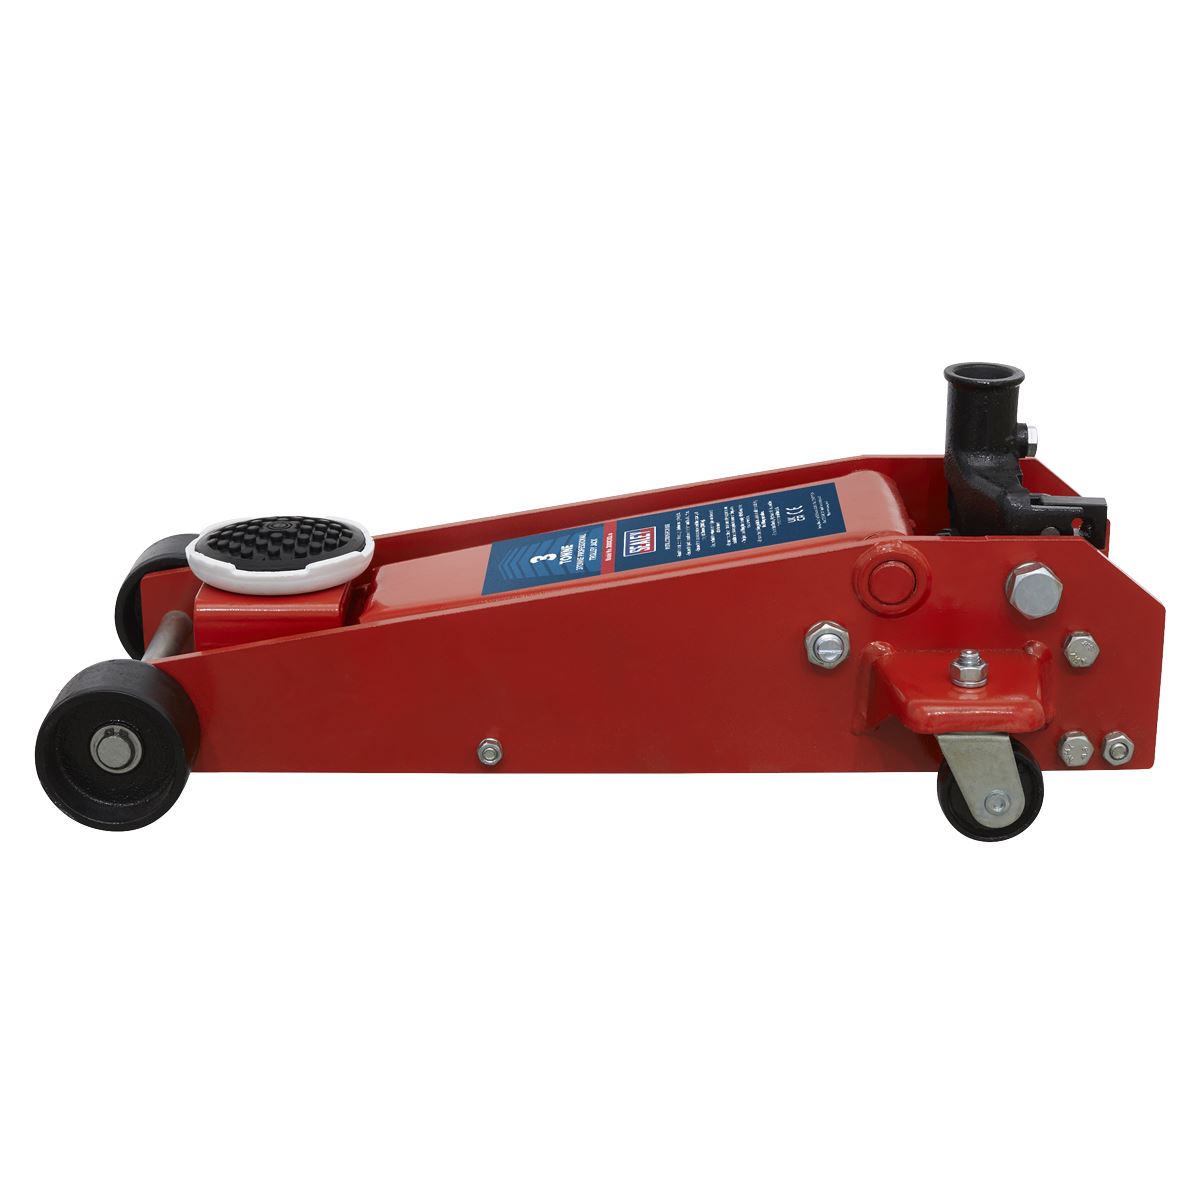 Sealey Trolley Jack 3 Tonne Standard Chassis